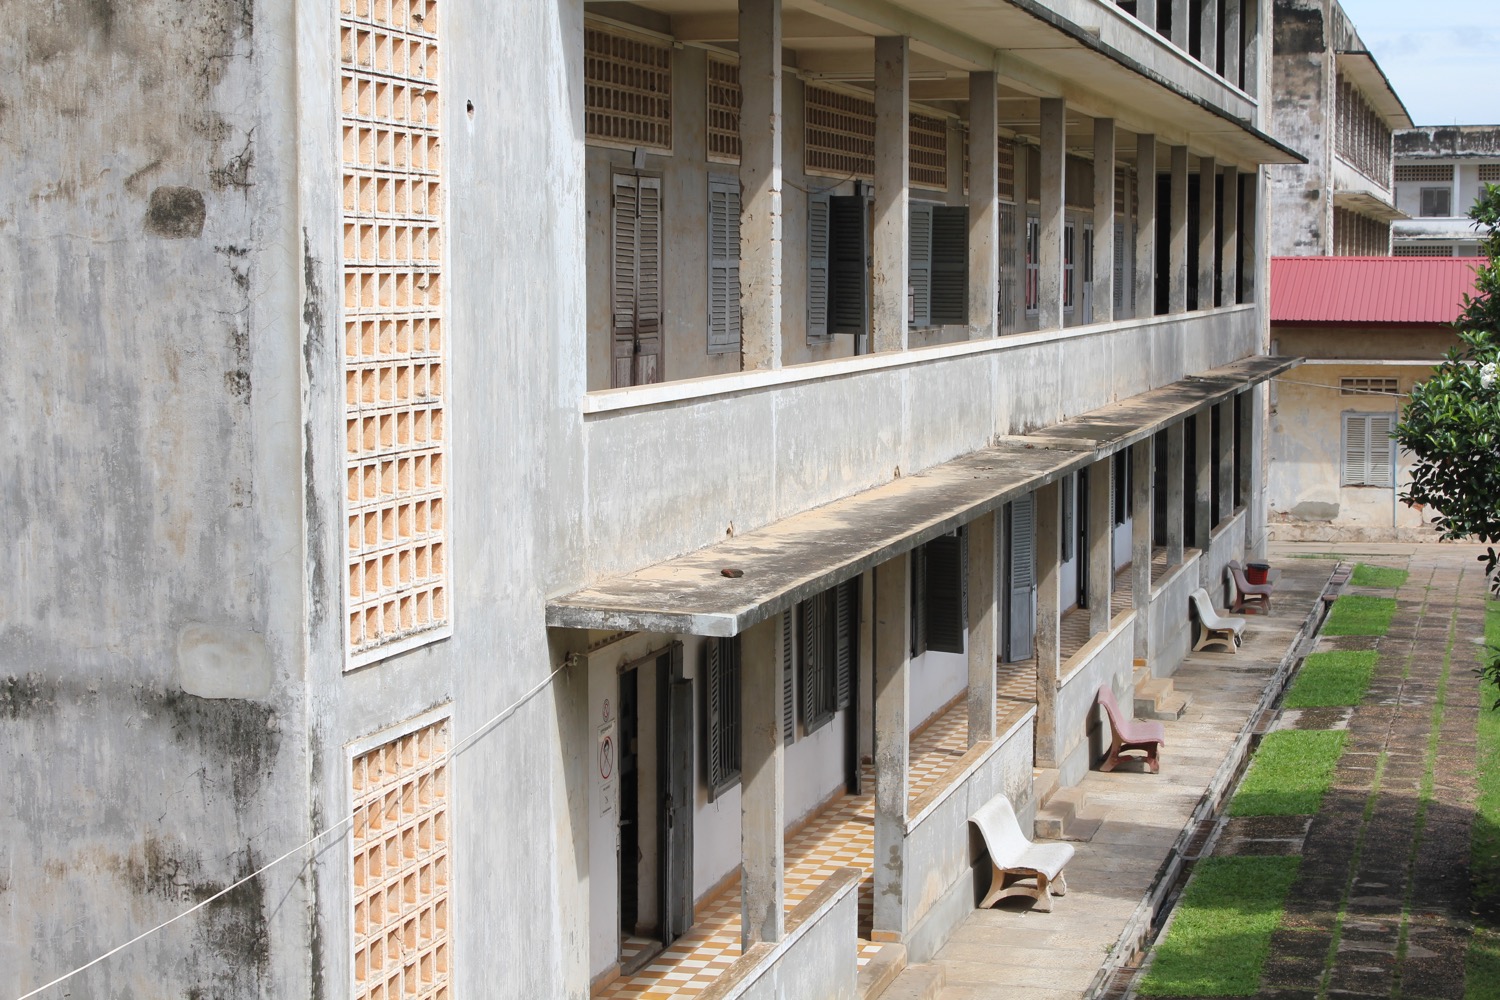 Tuol Sleng Genocide Museum - 8